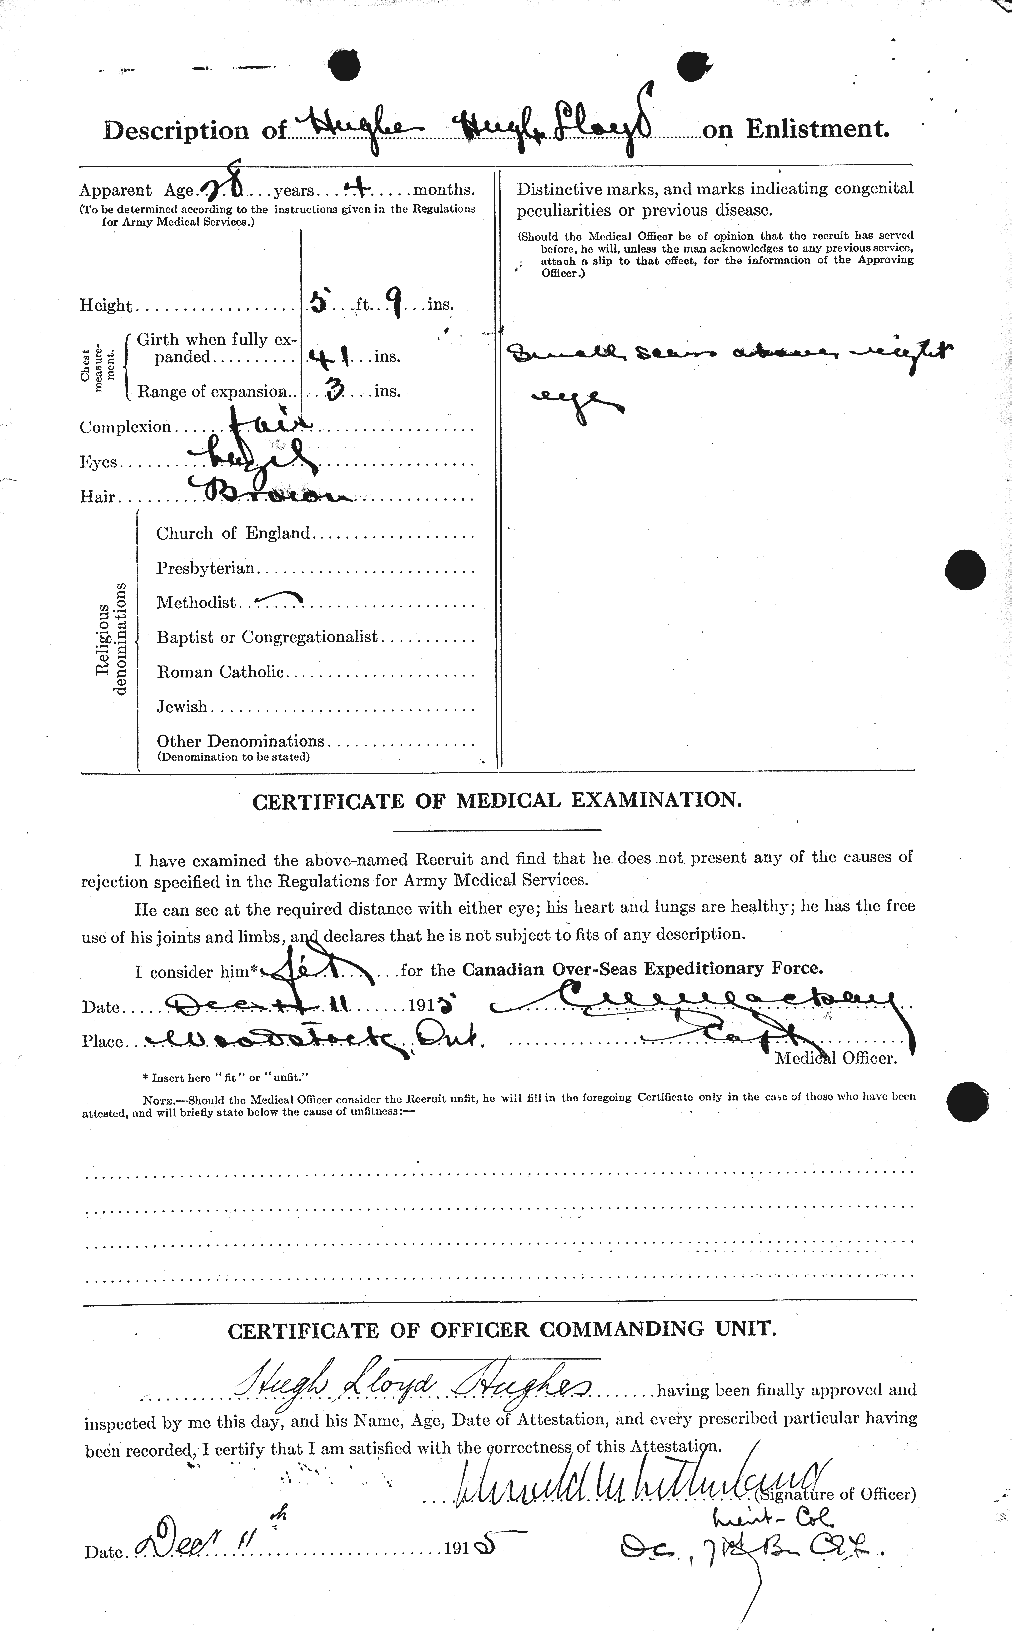 Personnel Records of the First World War - CEF 403924b